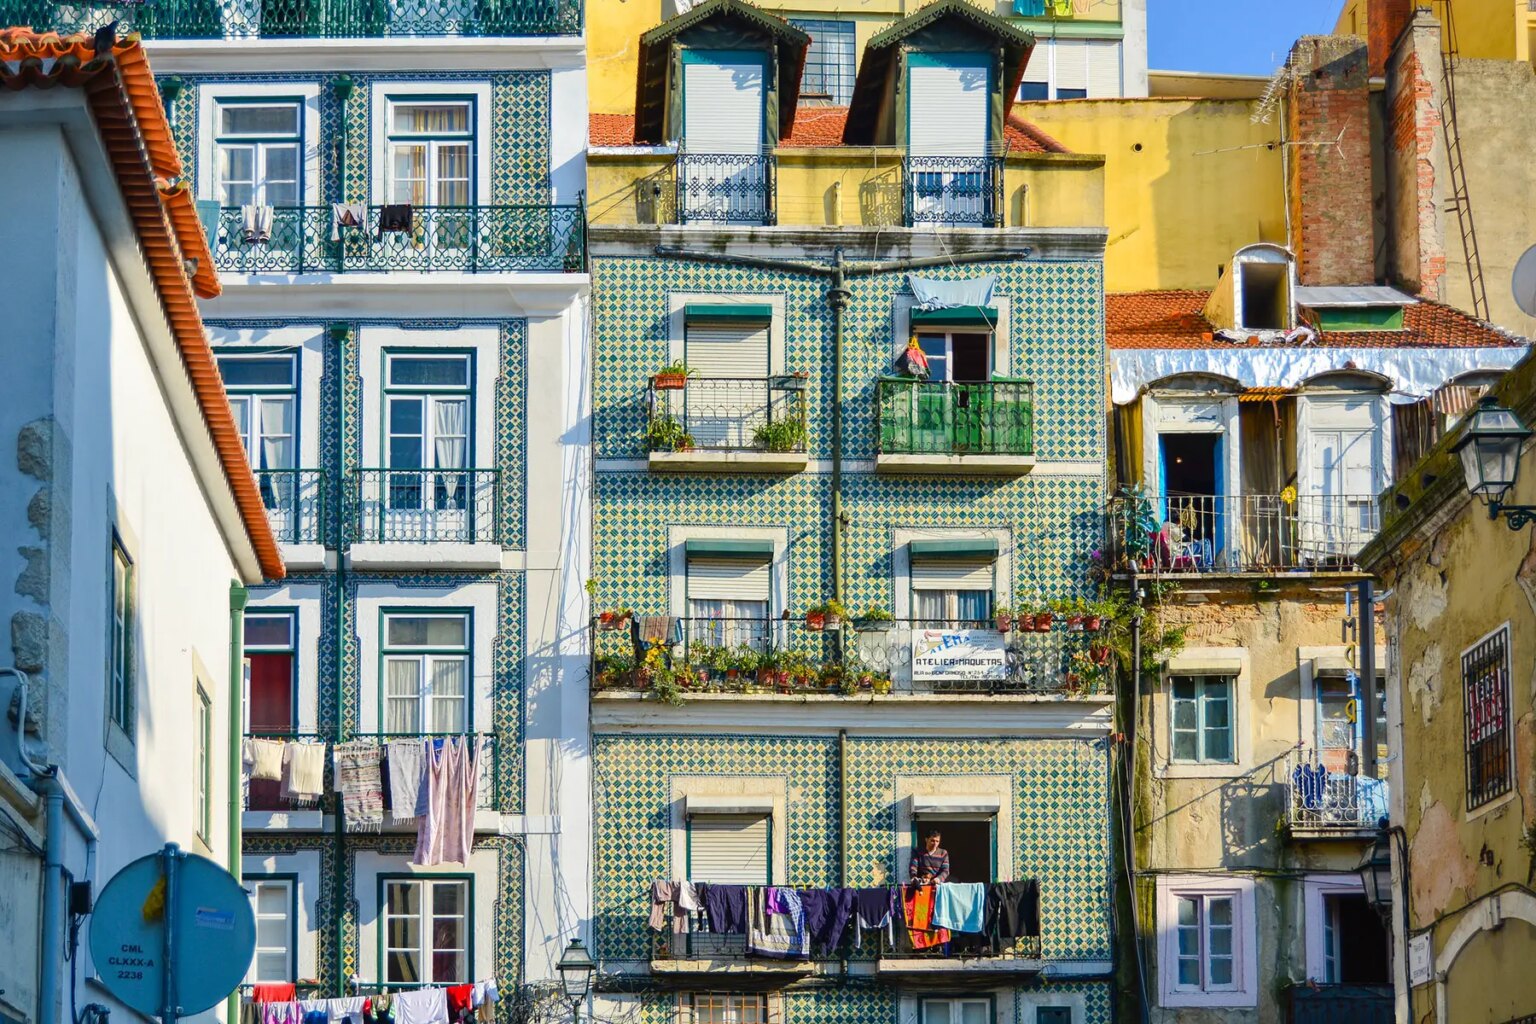 Housing in Portugal